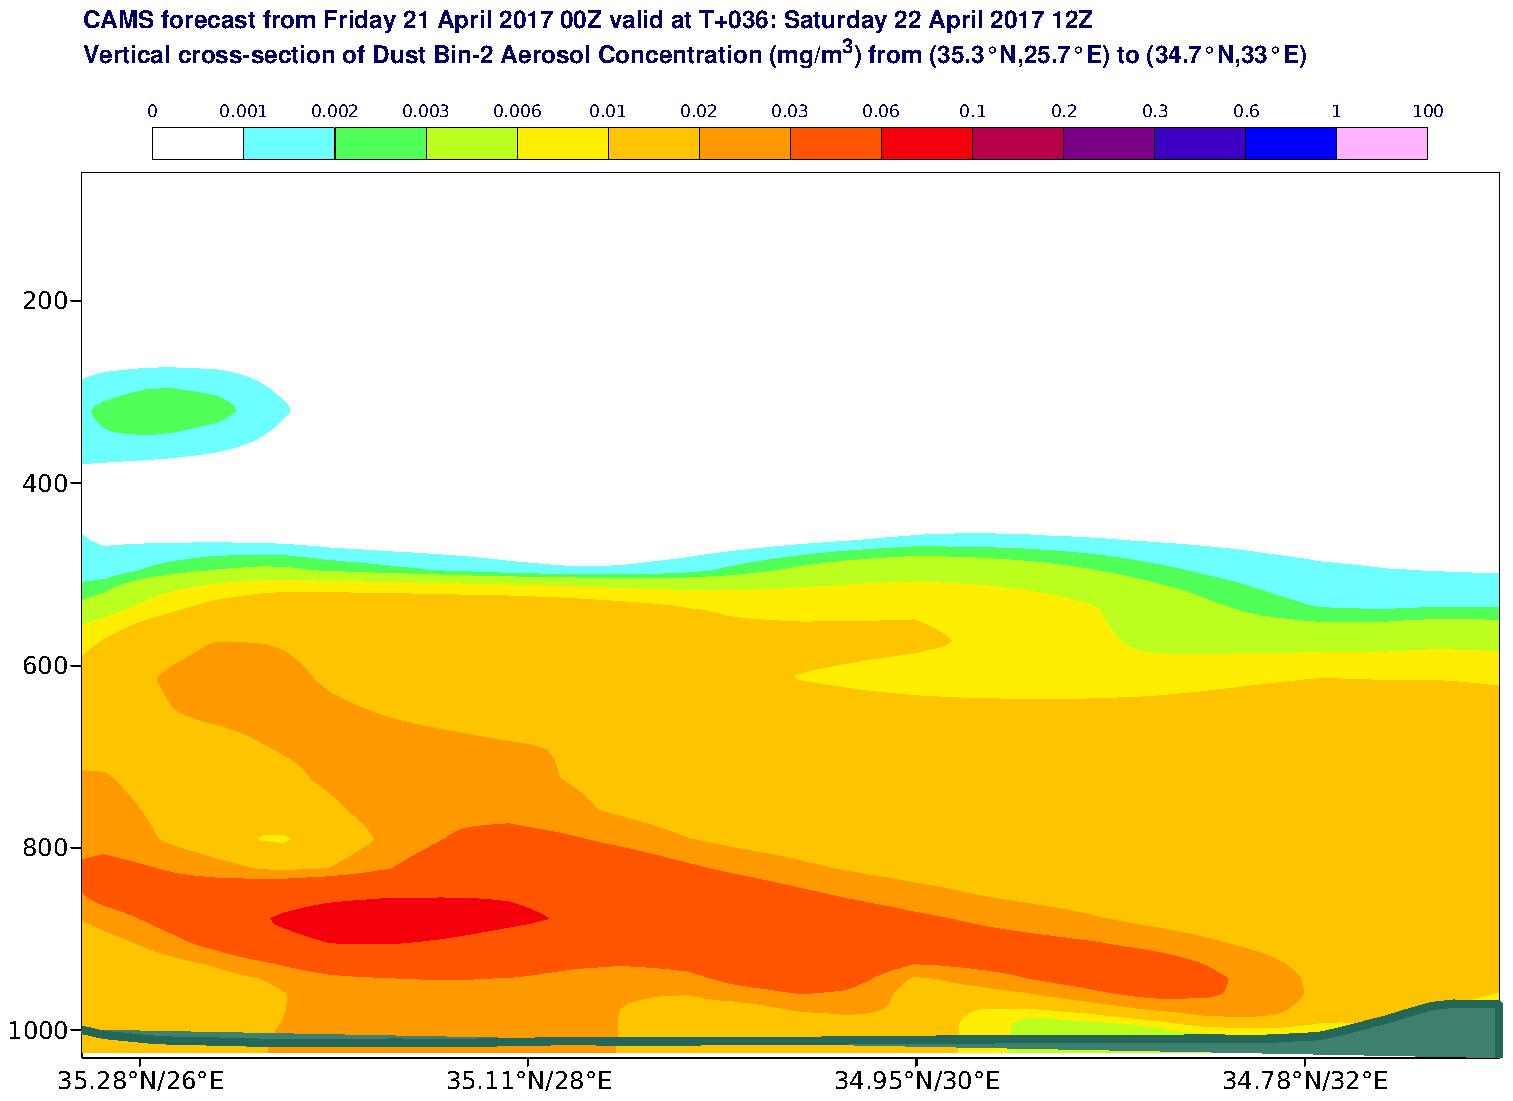 Vertical cross-section of Dust Bin-2 Aerosol Concentration (mg/m3) valid at T36 - 2017-04-22 12:00